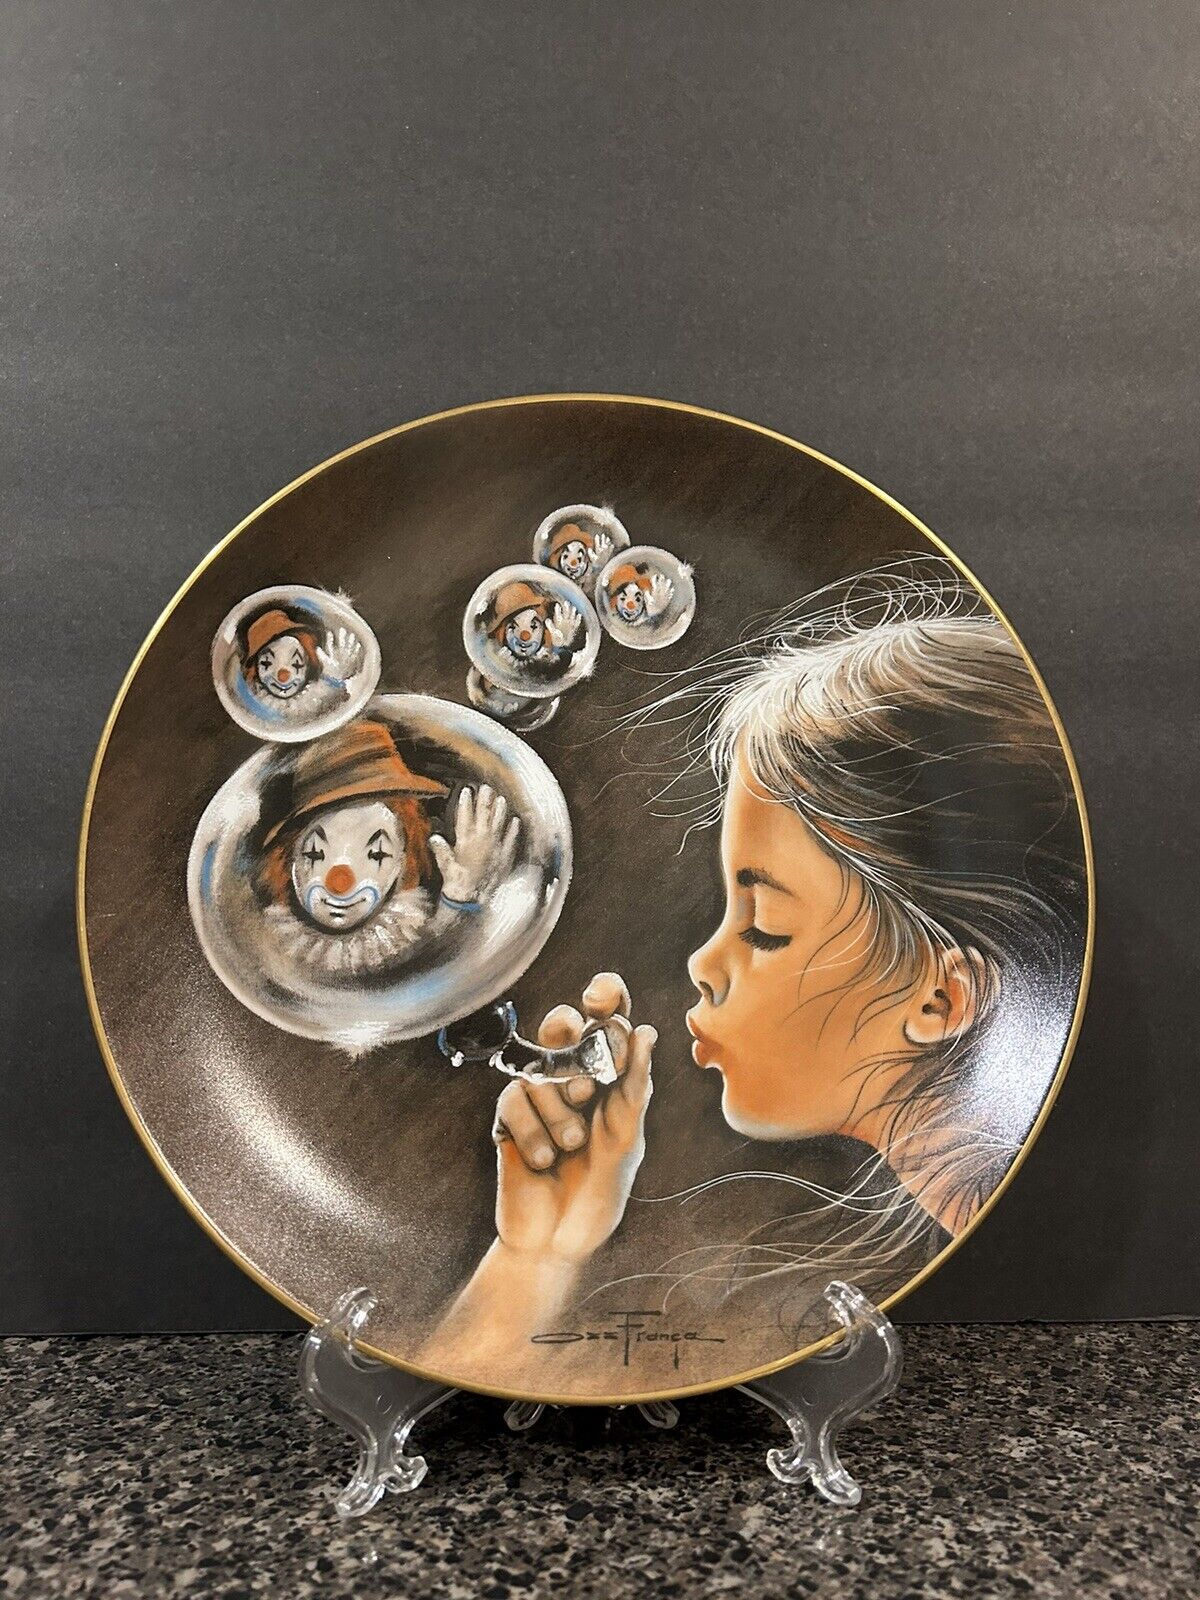 Hackett American Ozz Franca “Images” Collector Plate 1982